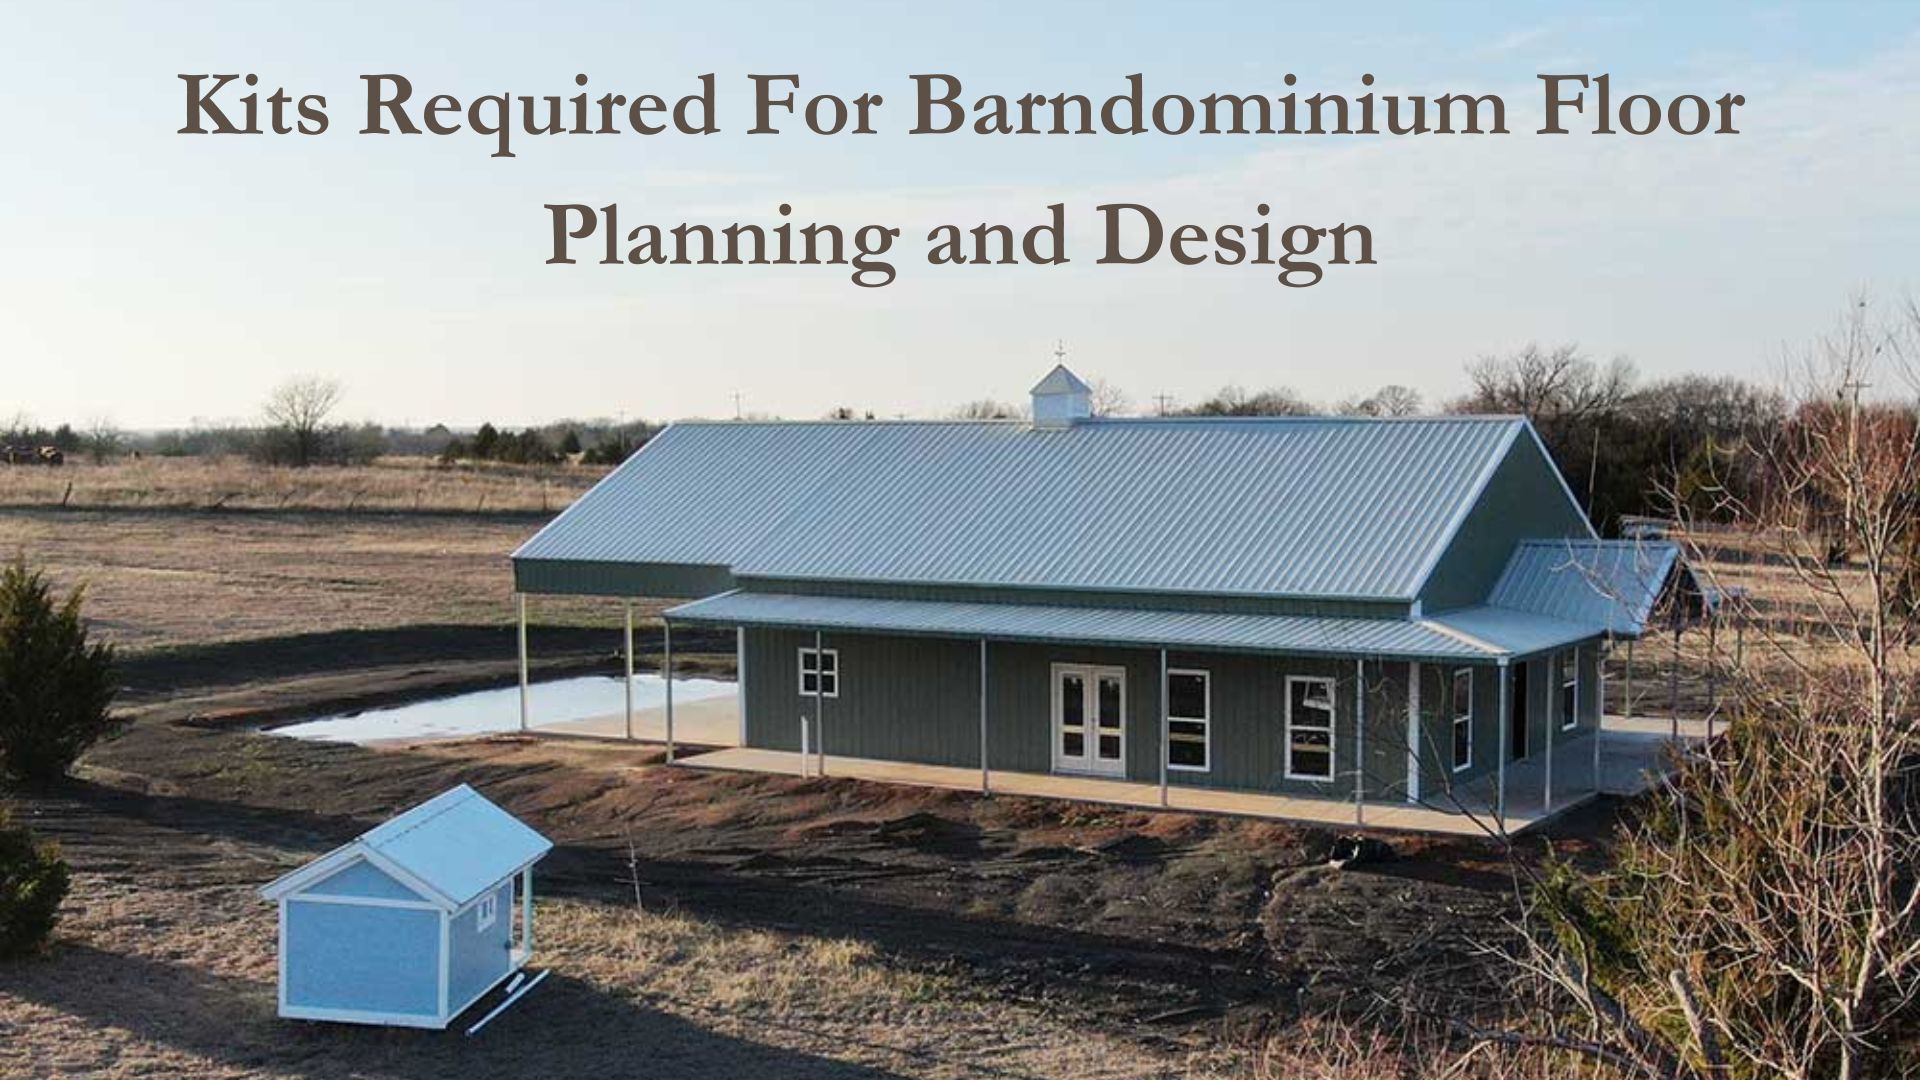 Kits Required For Barndominium Floor Planning and Design